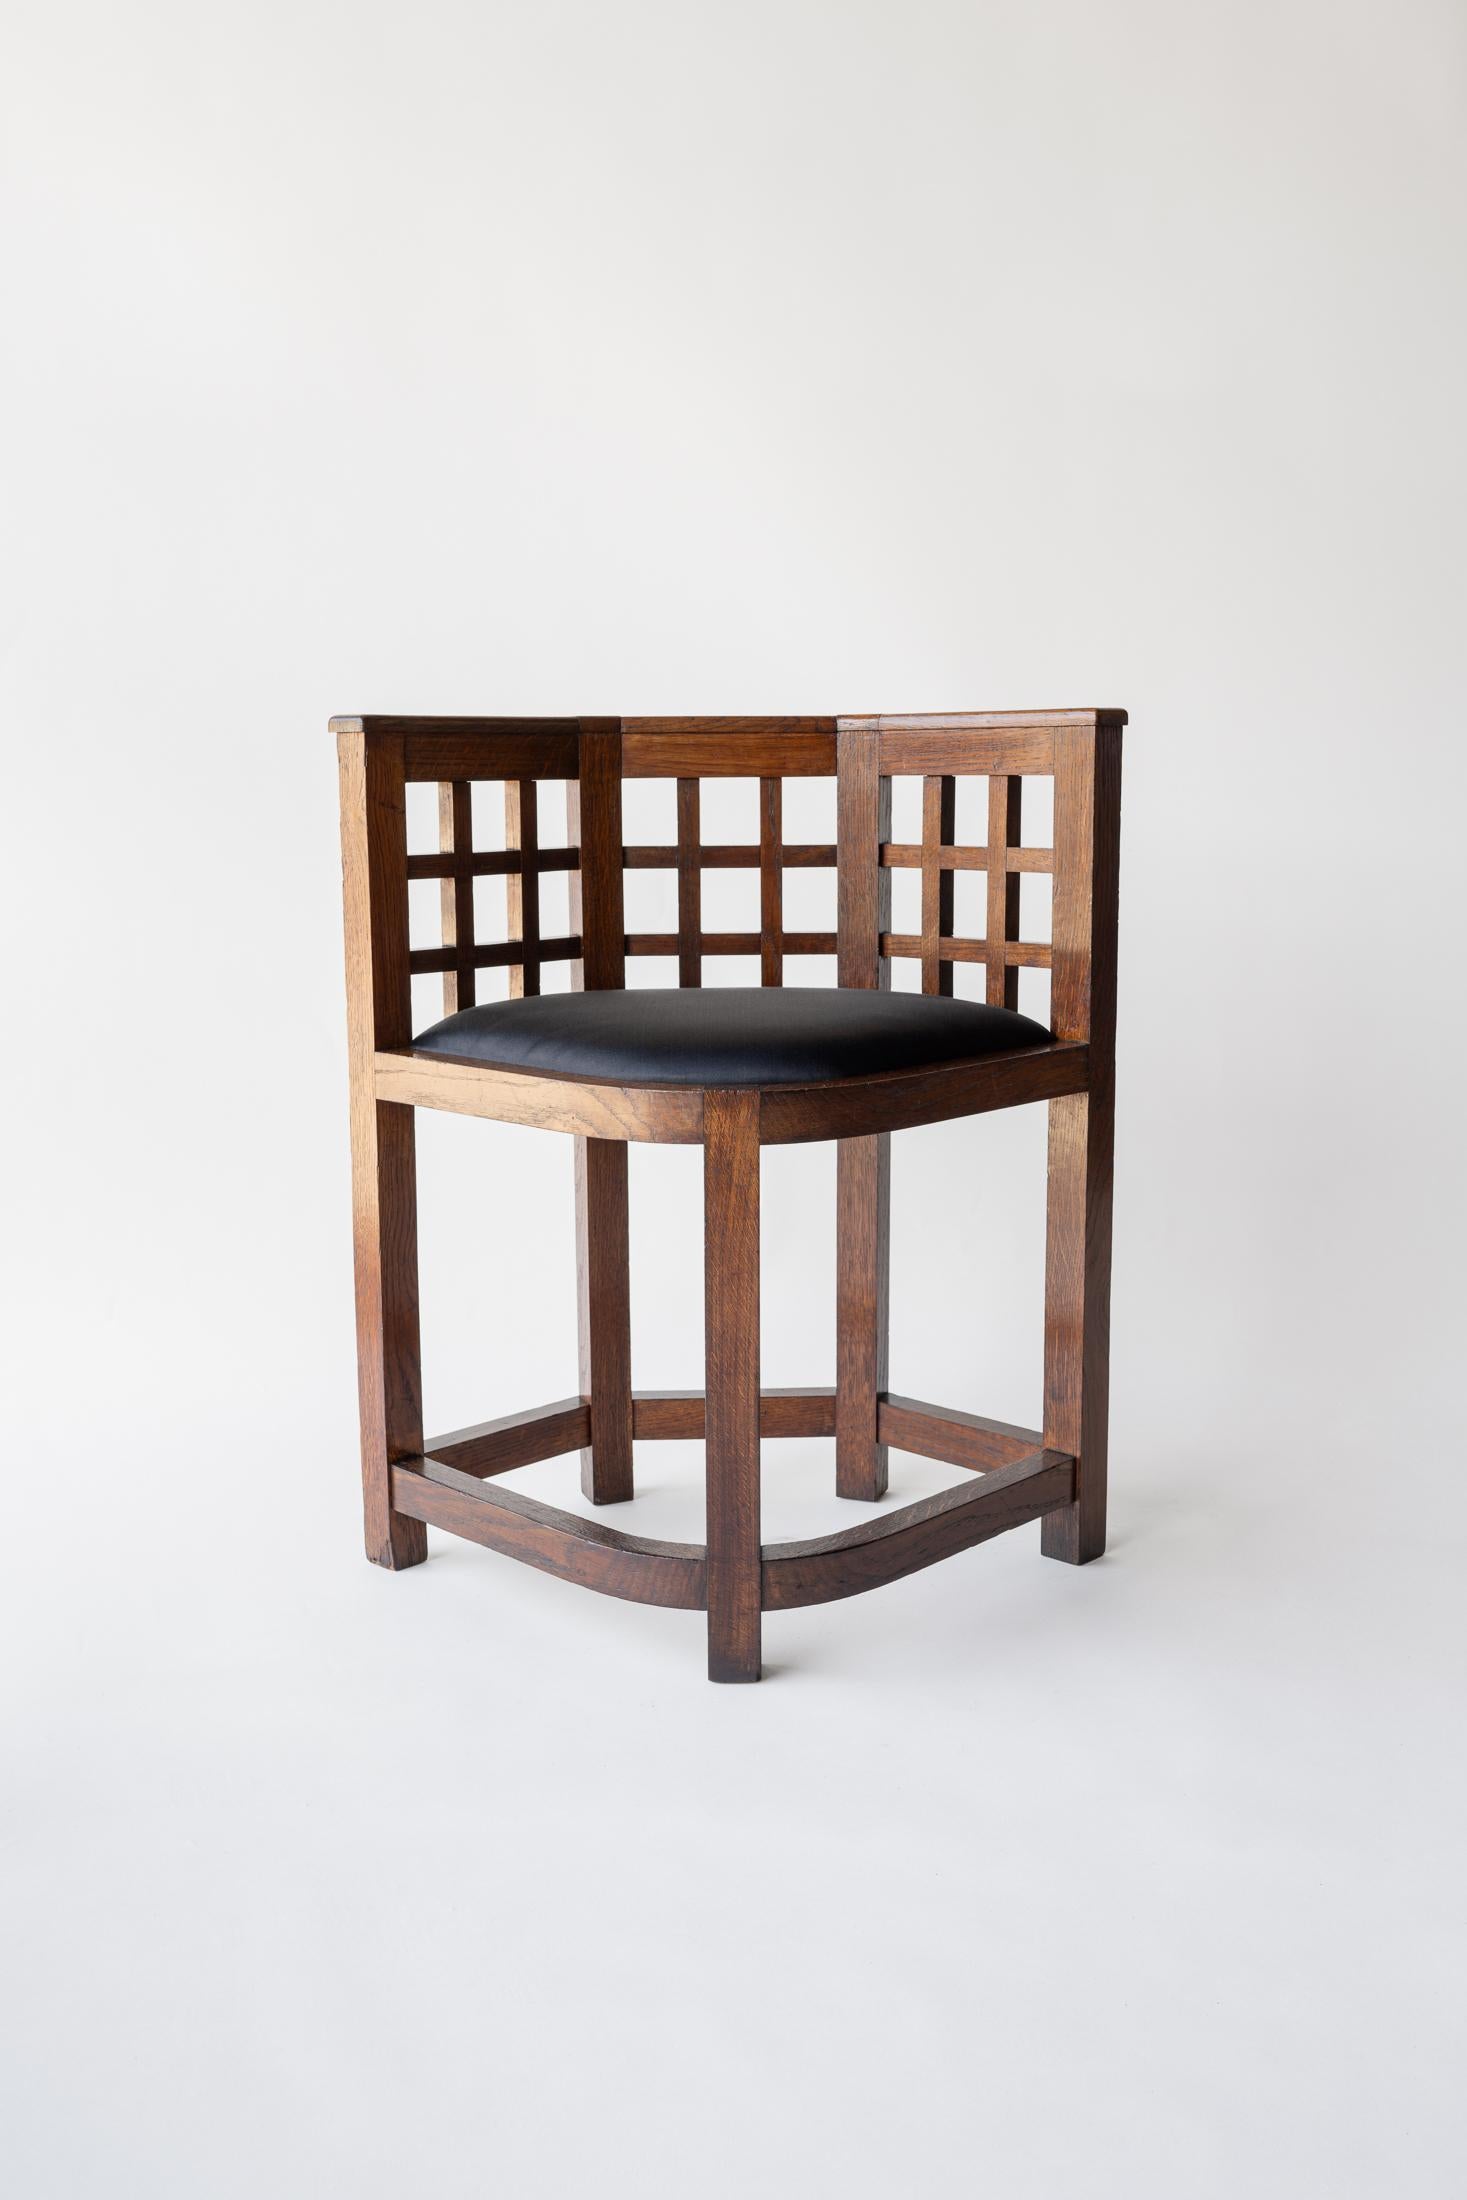 A chair originally part of a game table set by French designer Francis Jourdain (1876-1958). Bibliography: 